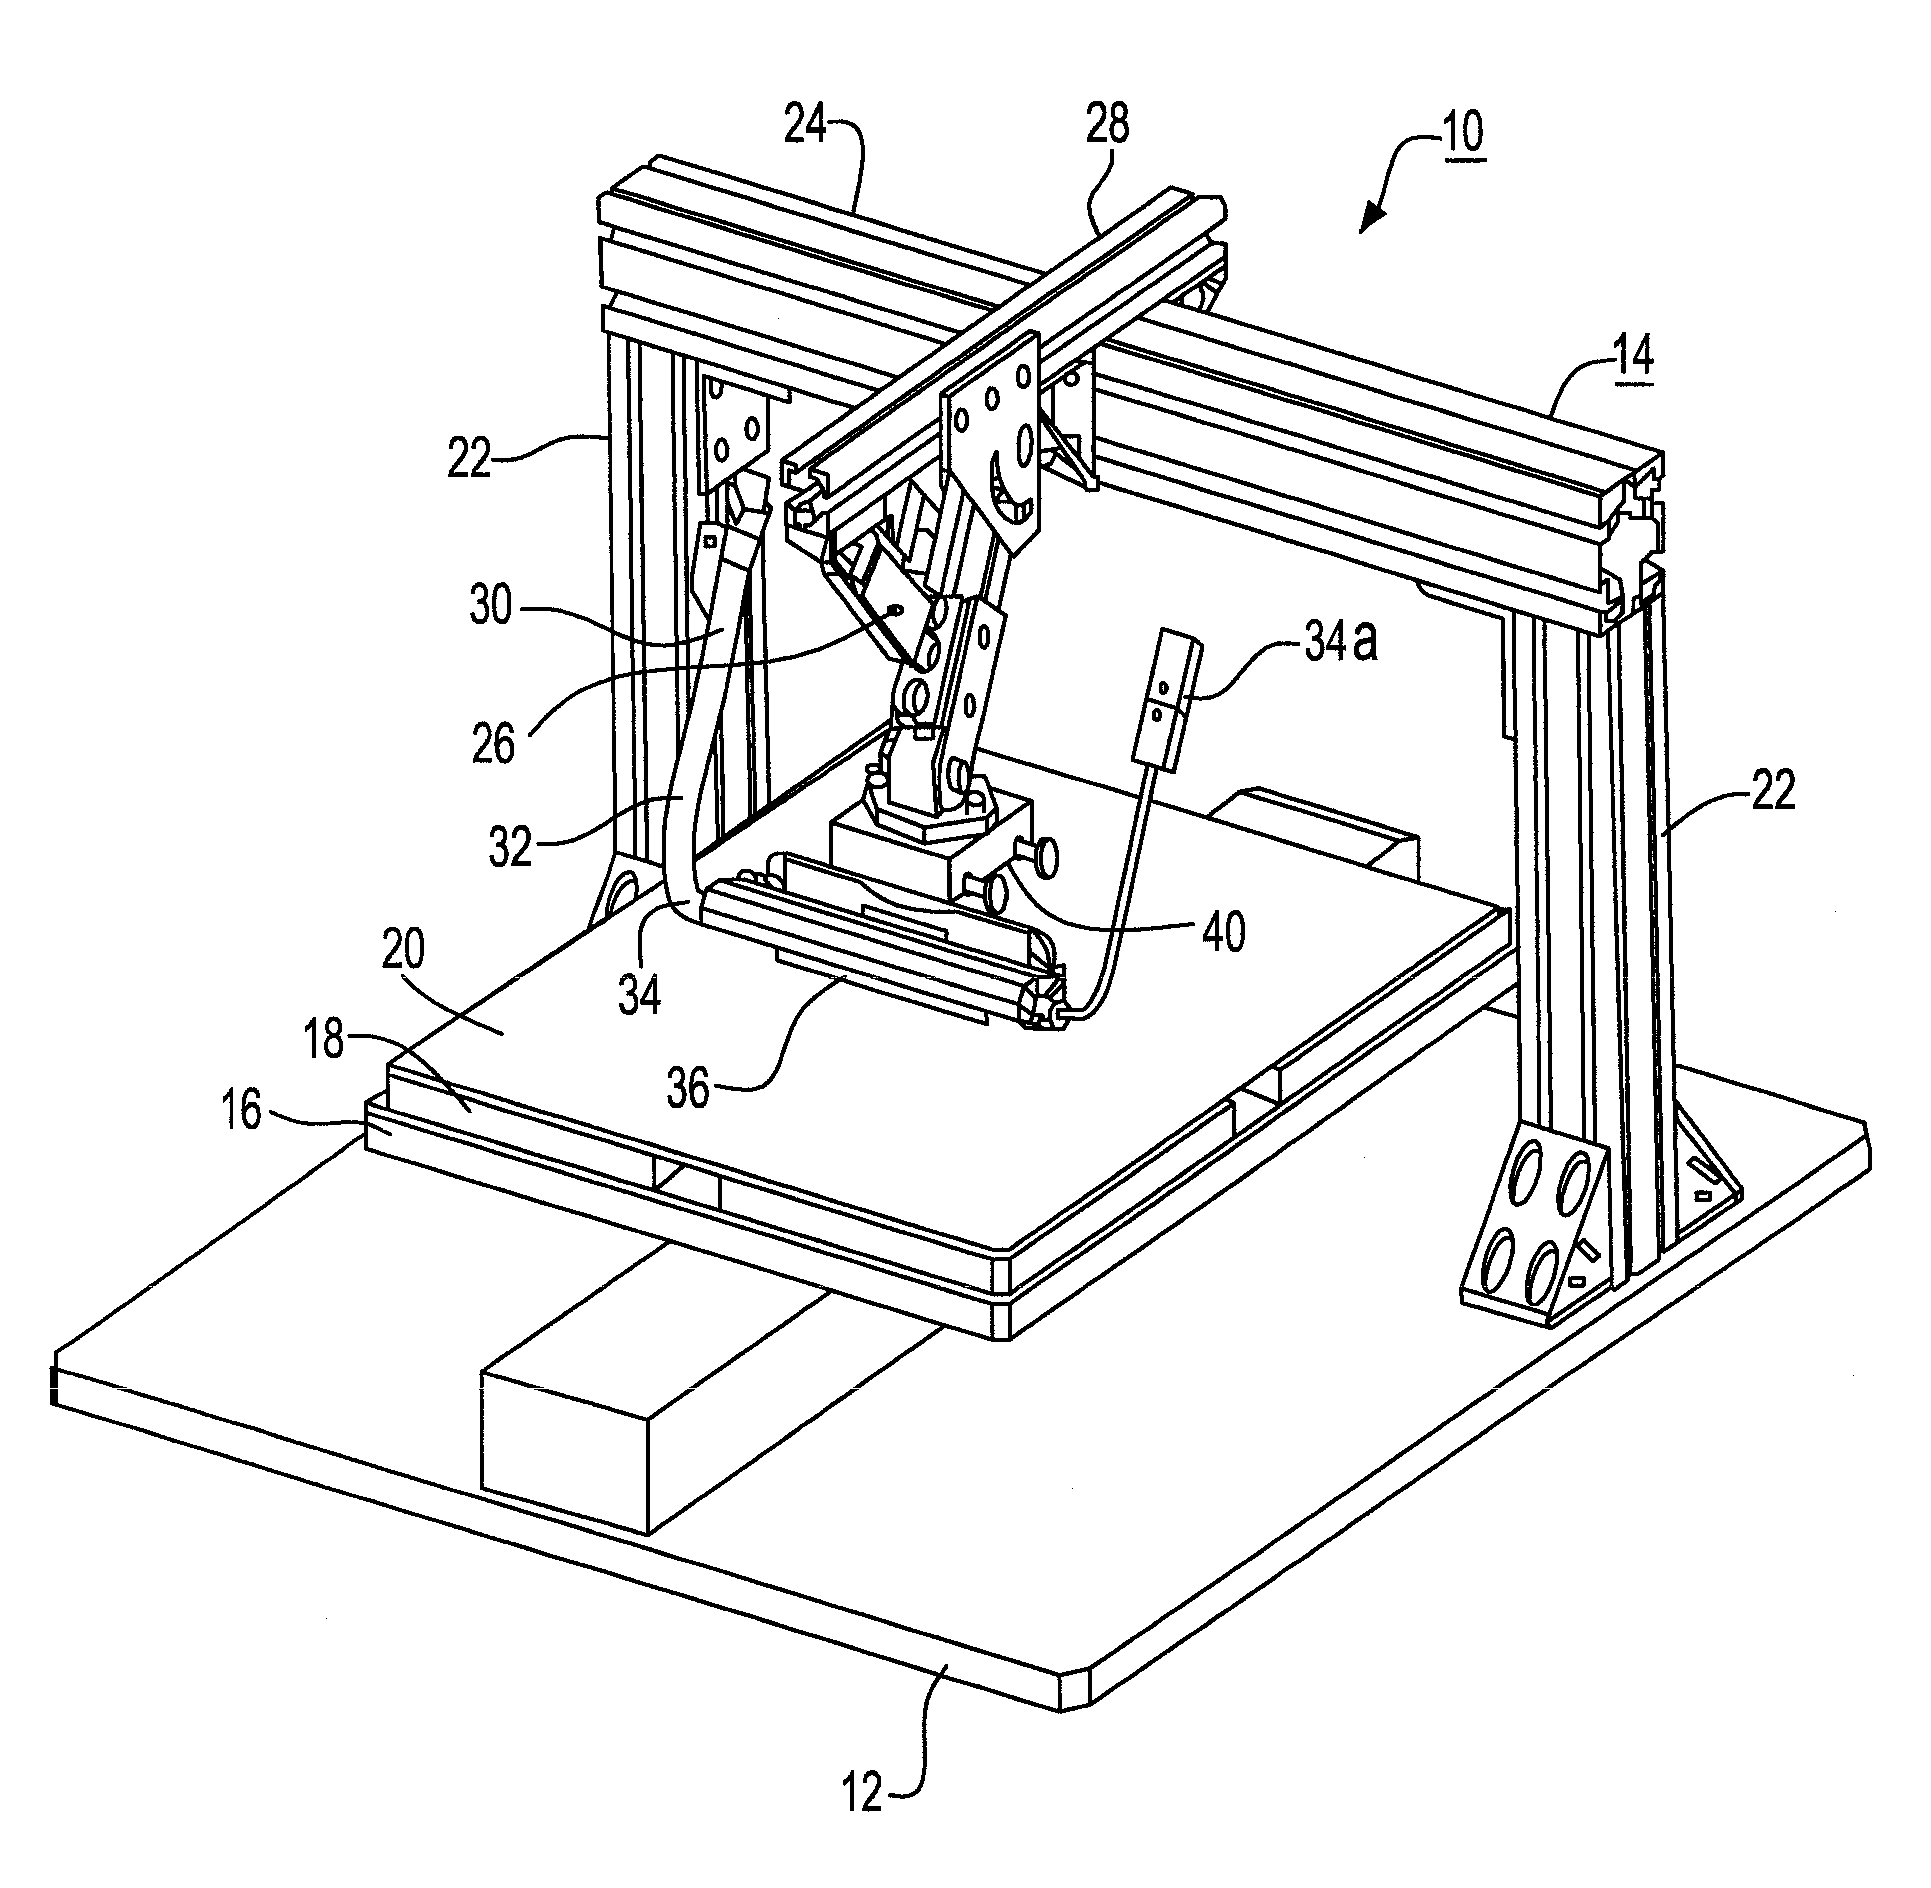 Mold shave apparatus and injection molded soldering process